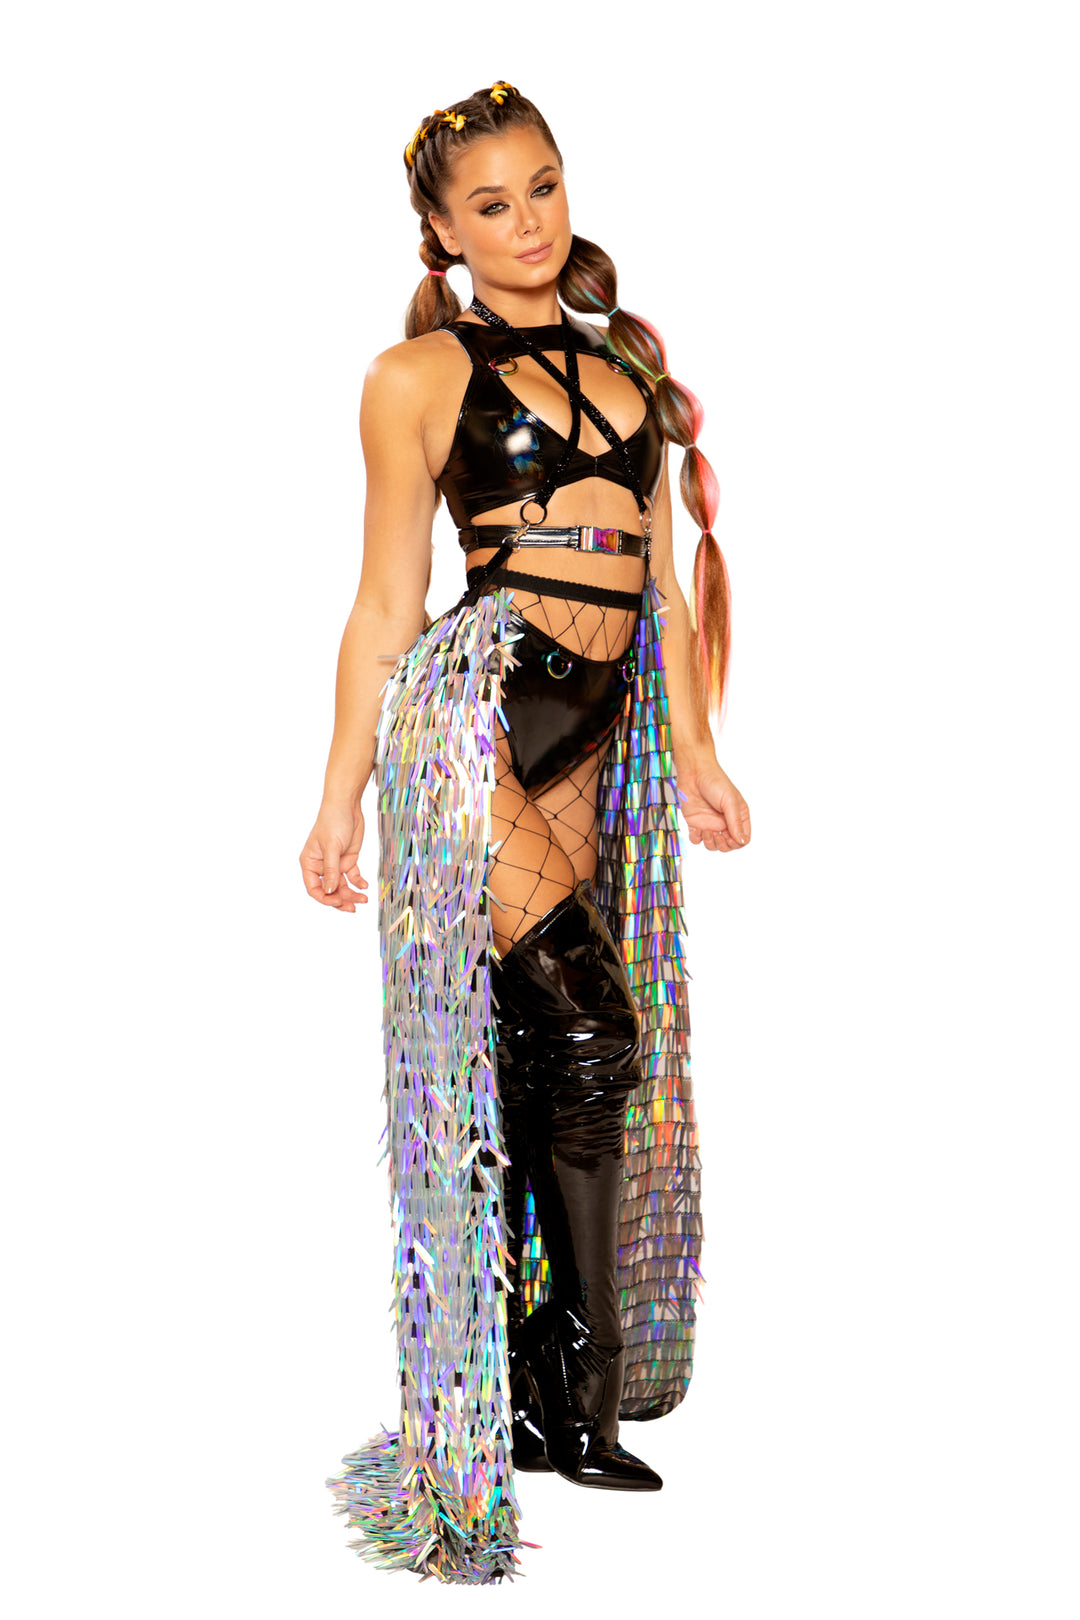 FF361 - Sequin Harness Gypsy Skirt